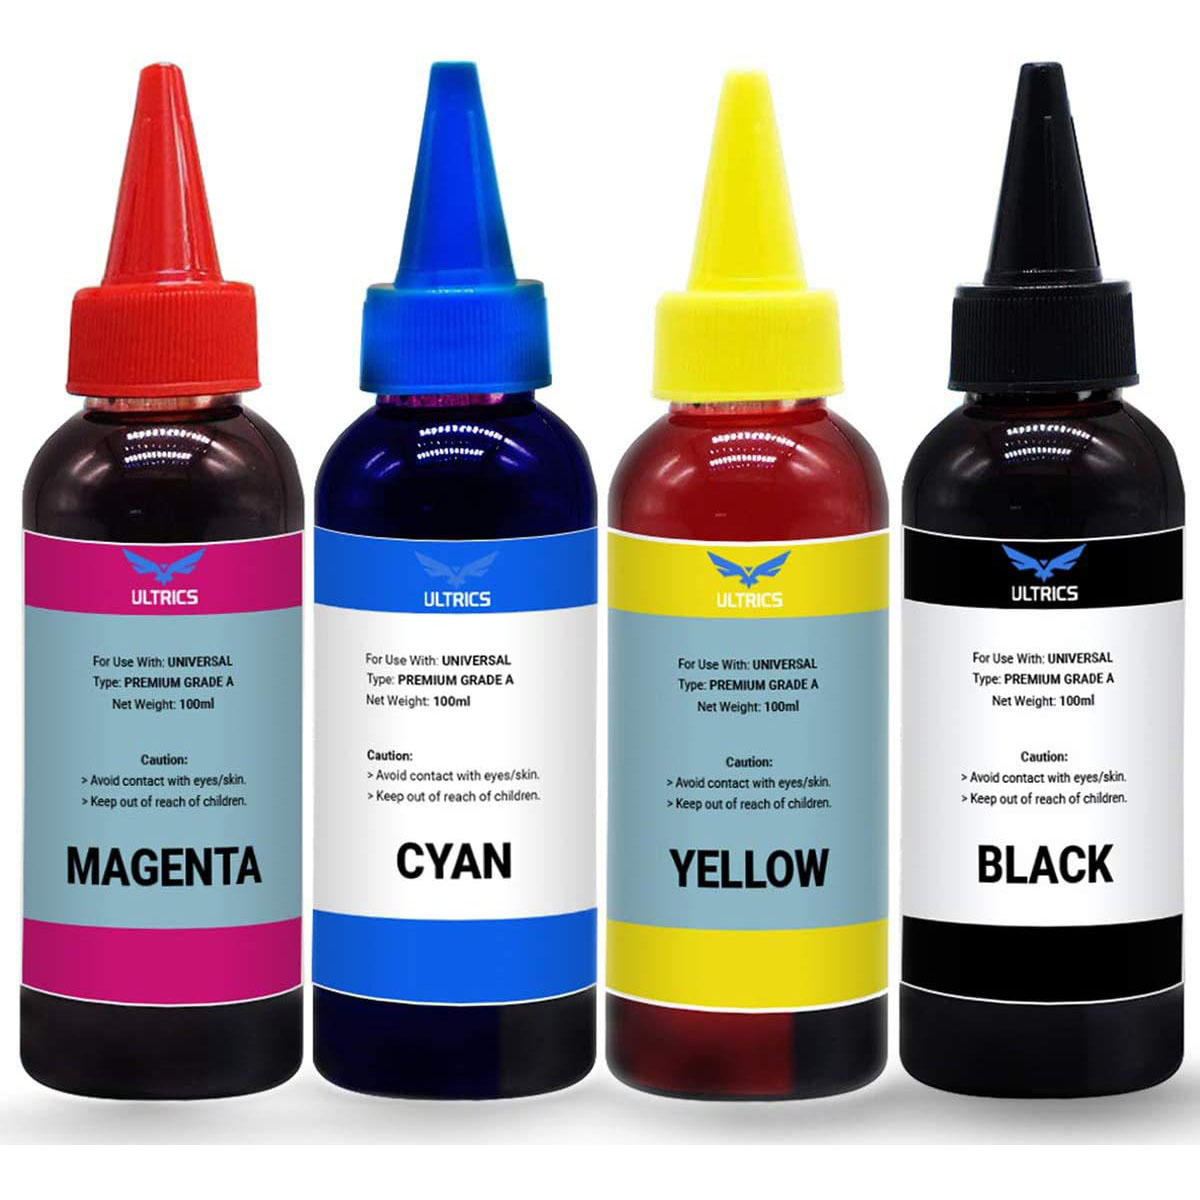 About this item 【PREMIUM QUALITY】 Refill ink bottle ensures premium quality through ultrafiltration, no clogging; quick-dry and weak acid or alkalescent formula, high fidelity and high-speed printing; no corrosion 【EASY TO REFILL】 Easy to refill printer ink will not spill out or make a mess as the tip will only dispense slowly. Yellow, black, cyan, magenta - 4 colours will serve your overall printing purpose 【UNIVERSAL COMPATIBILITY】 Our printer refill ink is compatible with Epson, Brother, Canon Pixma, HP DeskJet/ DeskWriter, Dell, Lexmark, Kodak, Samsung, Xerox and CISS or refillable printers 【ENVIRONMENT FRIENDLY】 High colour saturation, no smear; water-based formula, no toxicity, no chemical hazard, no environment pollution. High-quality materials used to give you the best print quality 【SUPERIOR PERFORMANCE】 Dye-based refillable ink delivering solid colour comes in 100ml bottle, enough to refill several times. 4 bottles can colour print around 6000 pages with 5% coverage of A4